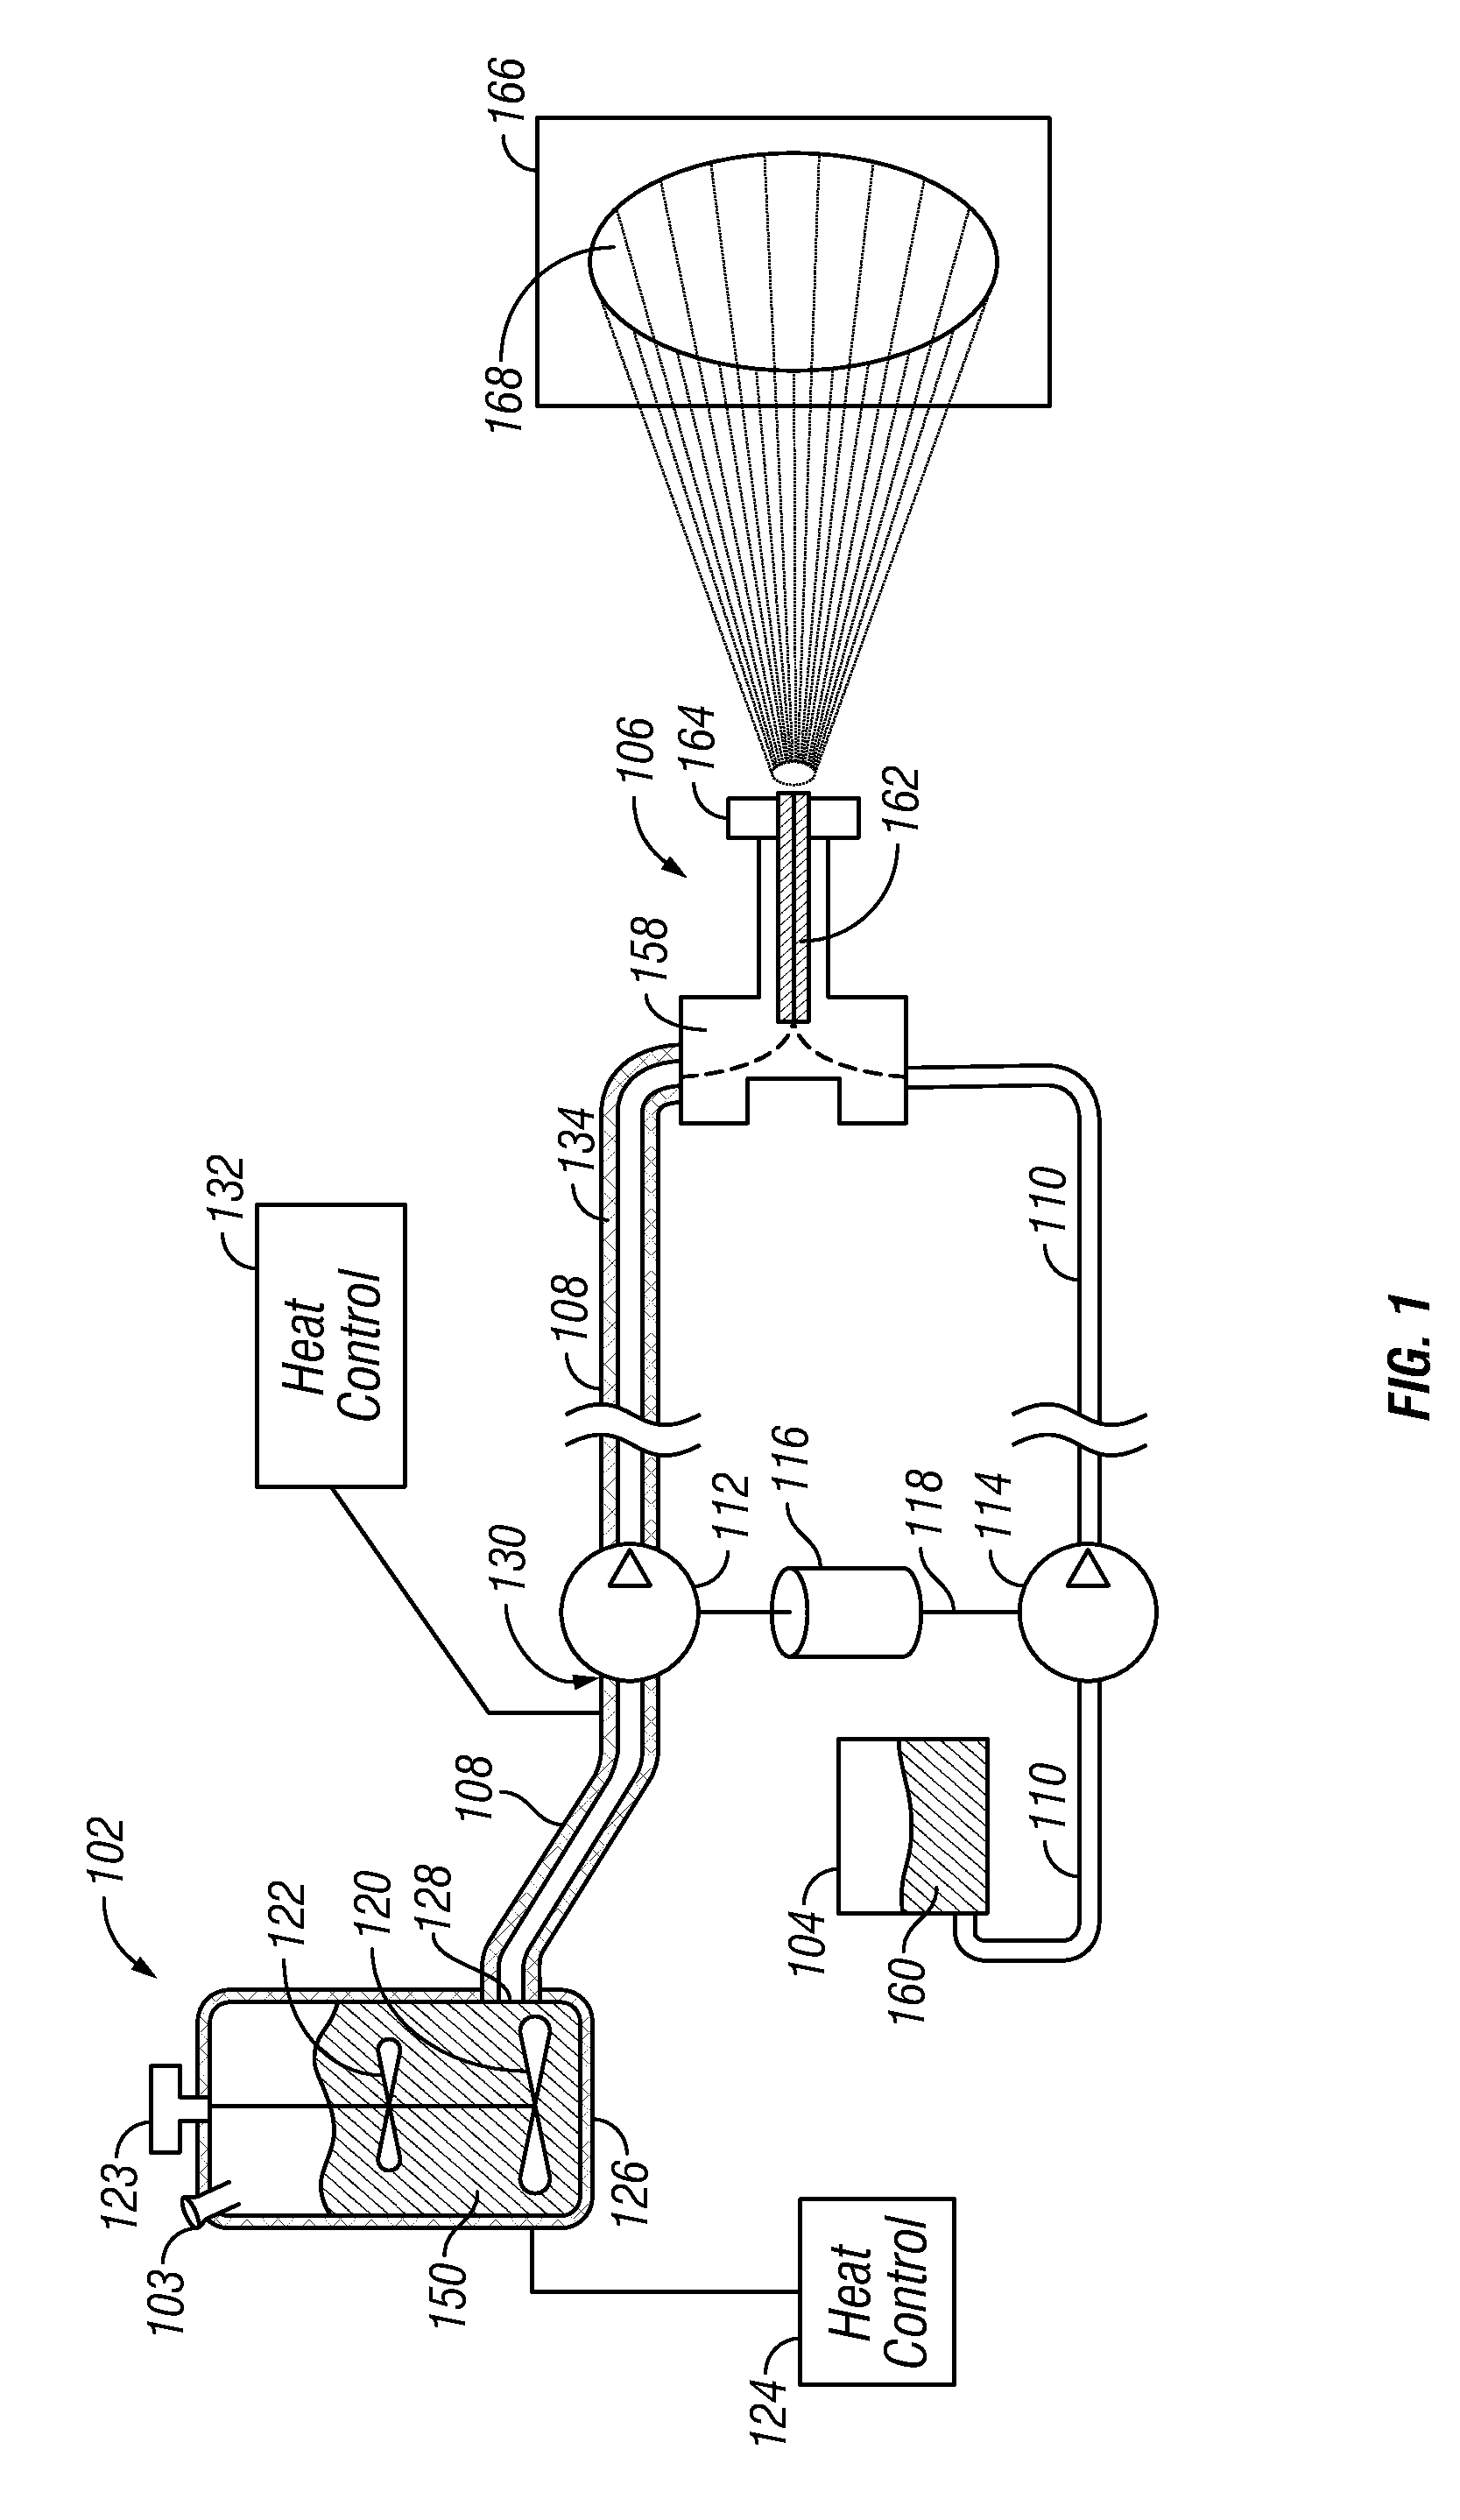 Systems and methods for processing and despensing filled multi-component material